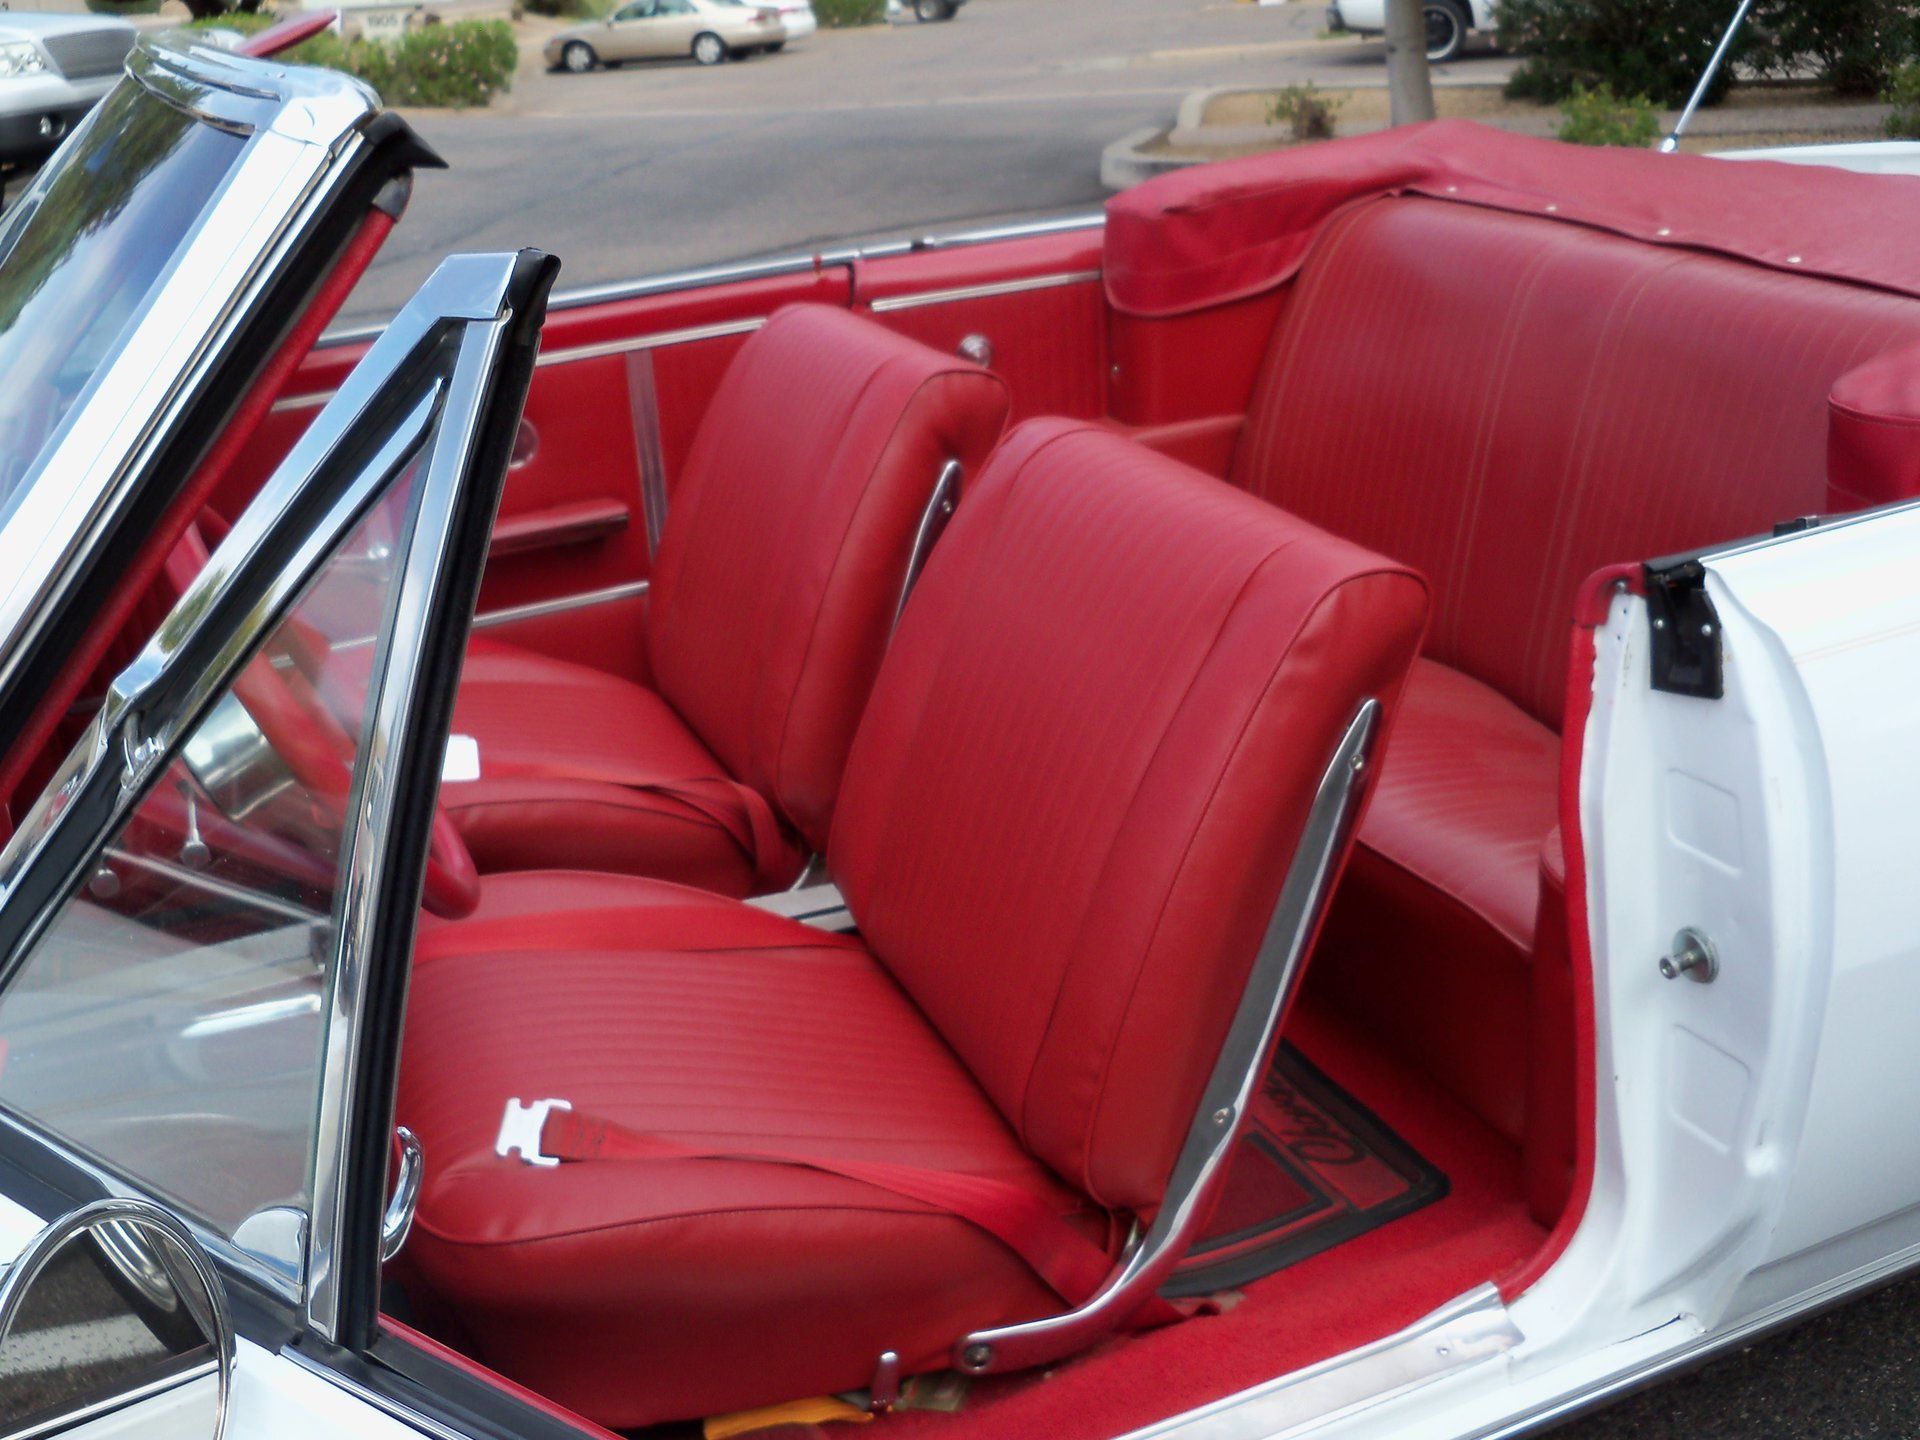 Red auto interior upholstery